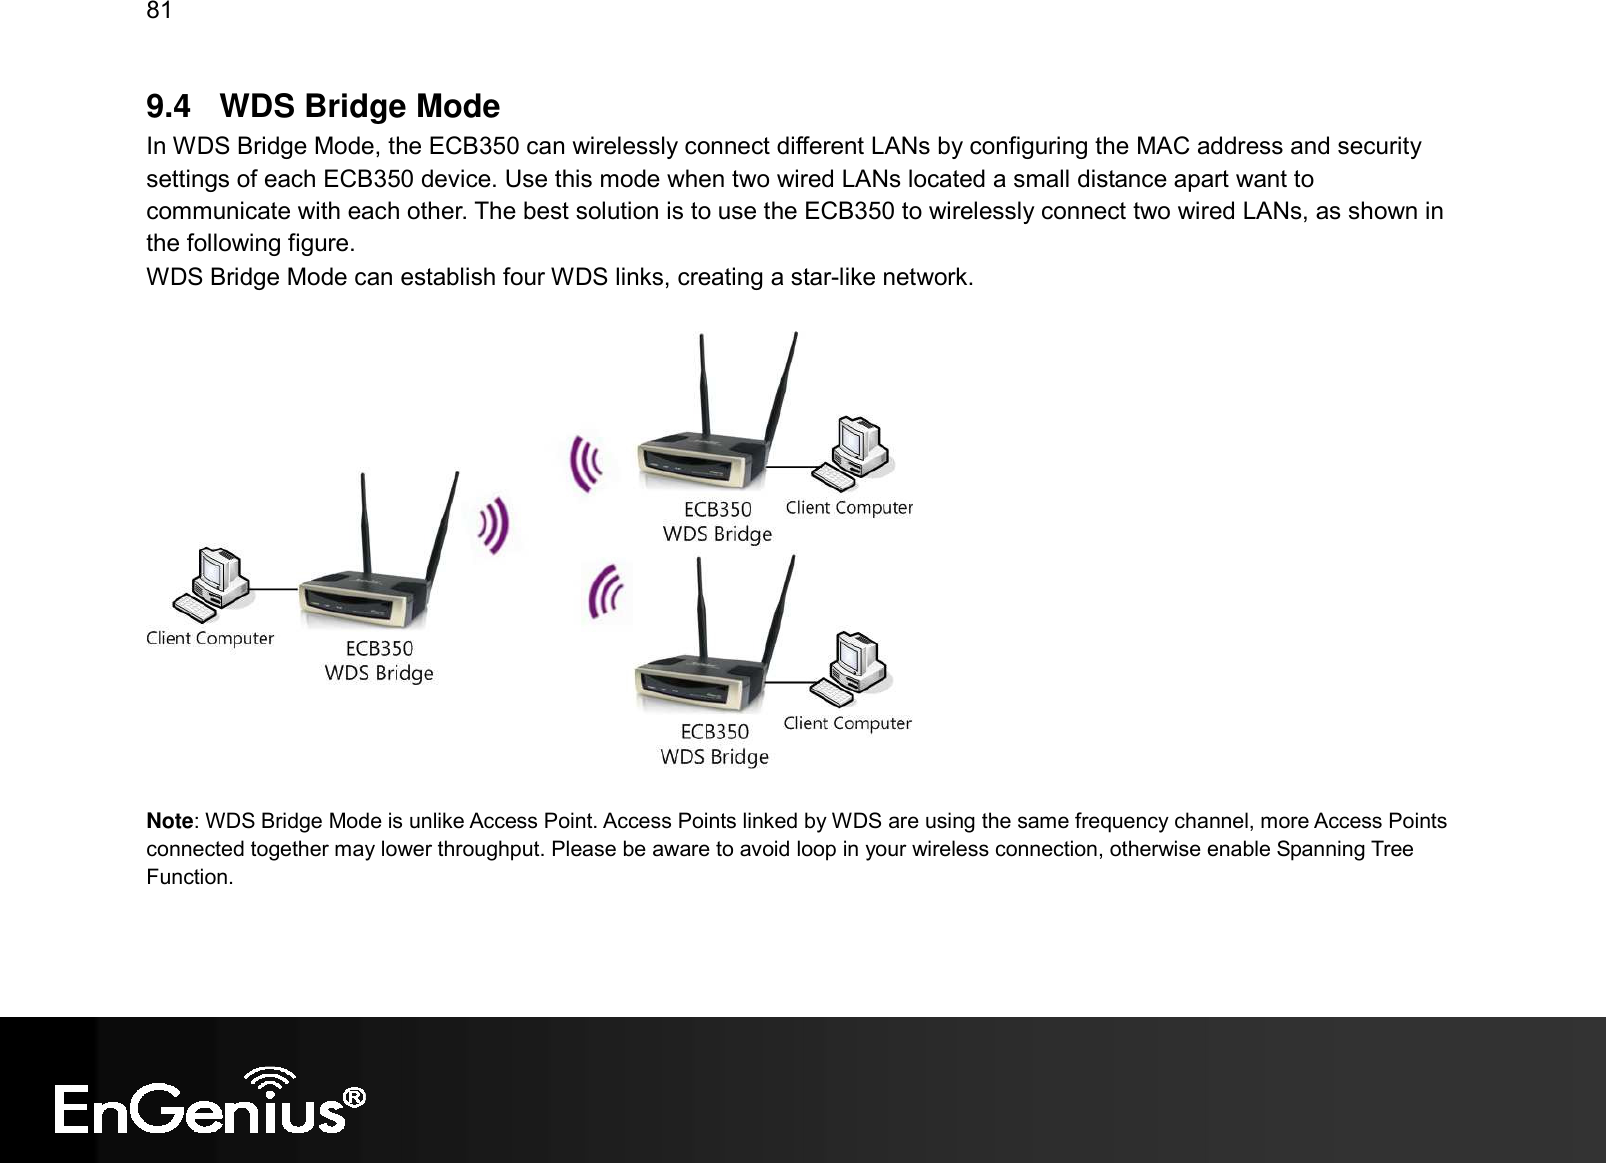 81  9.4  WDS Bridge Mode In WDS Bridge Mode, the ECB350 can wirelessly connect different LANs by configuring the MAC address and security settings of each ECB350 device. Use this mode when two wired LANs located a small distance apart want to communicate with each other. The best solution is to use the ECB350 to wirelessly connect two wired LANs, as shown in the following figure.  WDS Bridge Mode can establish four WDS links, creating a star-like network.     Note: WDS Bridge Mode is unlike Access Point. Access Points linked by WDS are using the same frequency channel, more Access Points connected together may lower throughput. Please be aware to avoid loop in your wireless connection, otherwise enable Spanning Tree Function. 